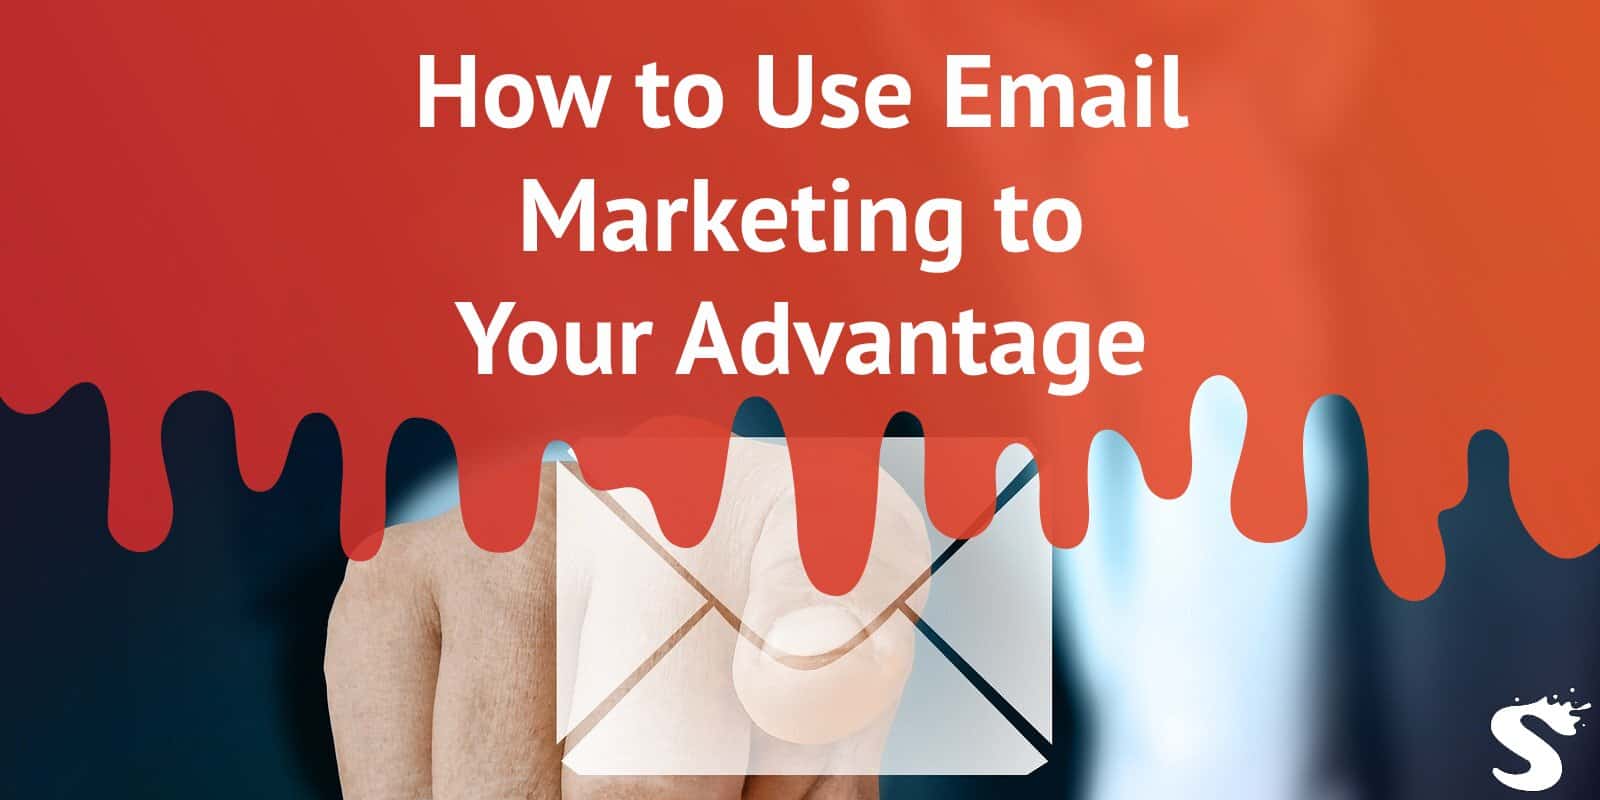 How to Use Email Marketing to Your Advantage